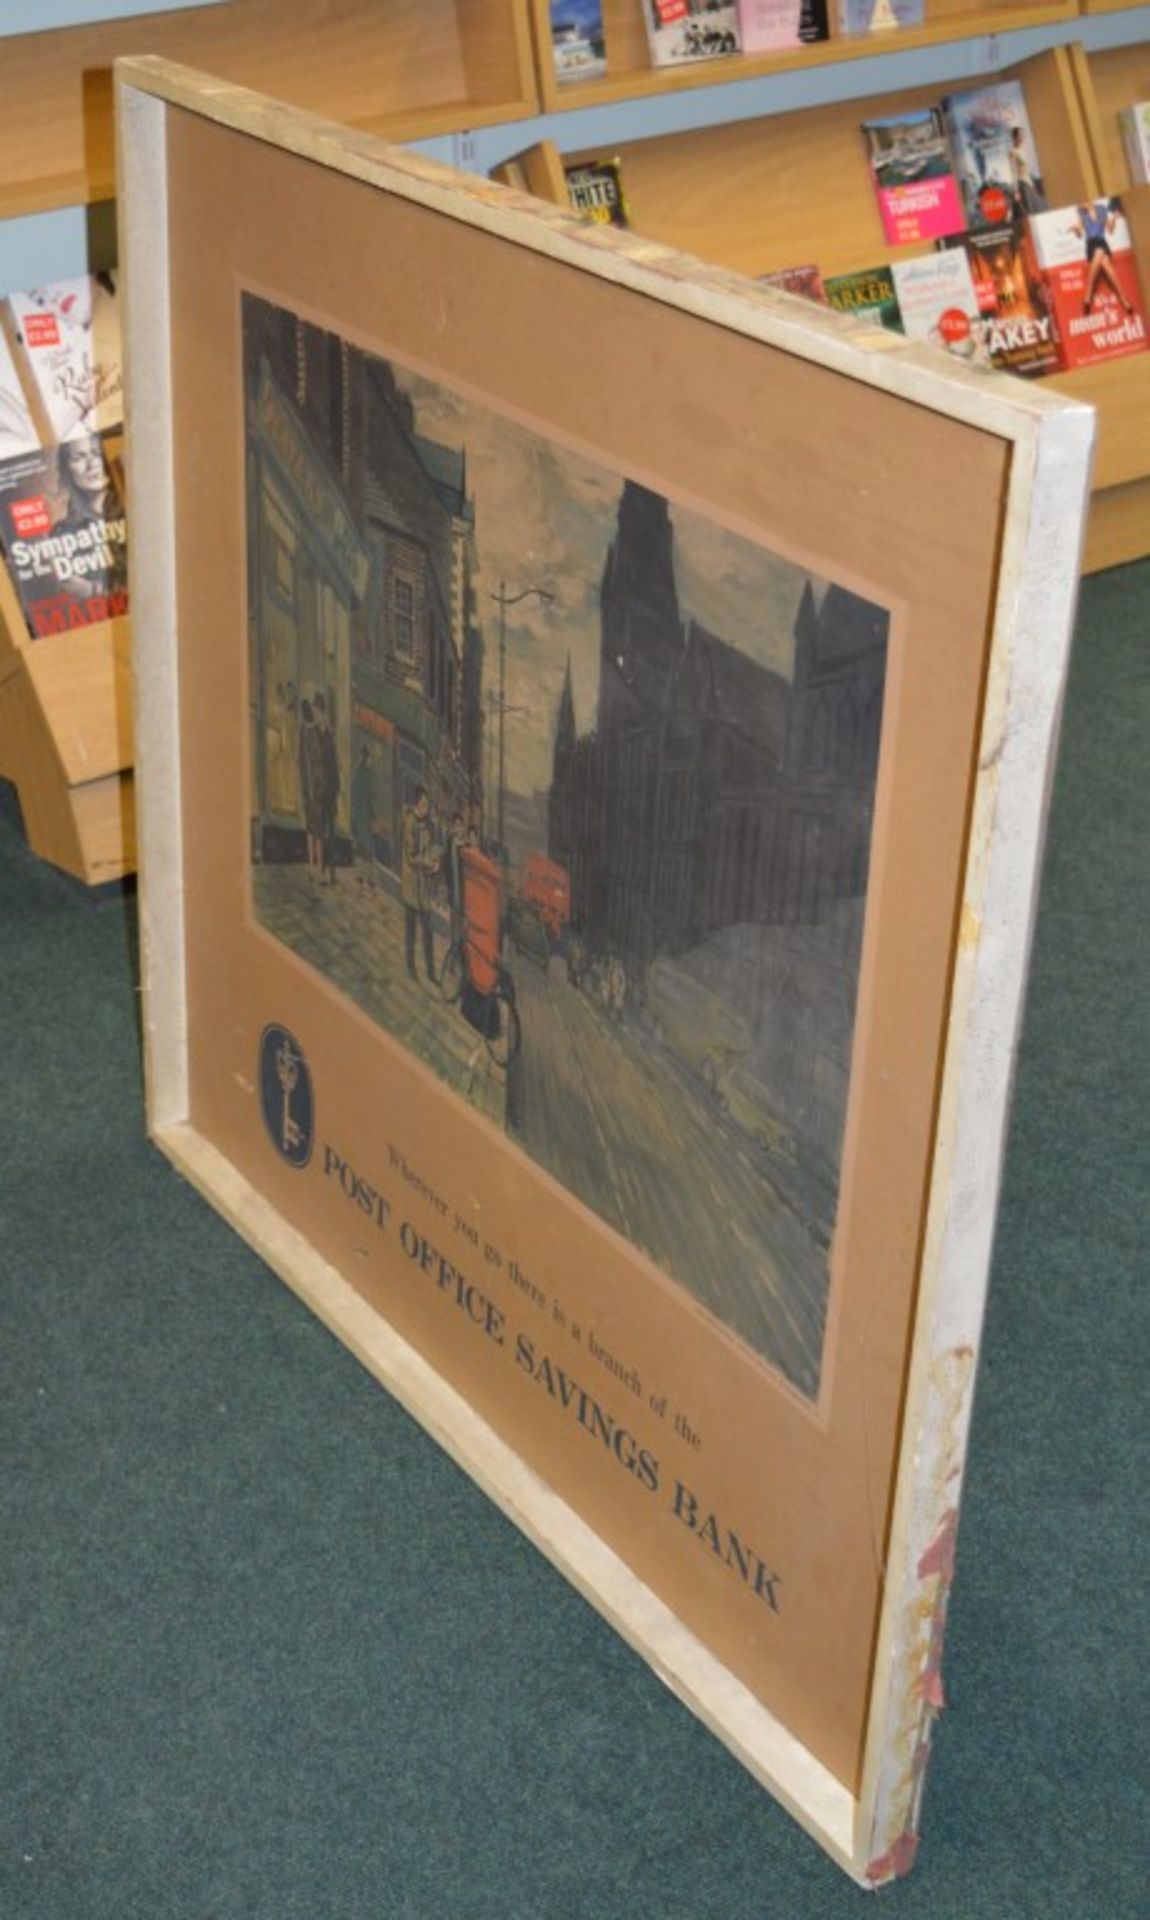 1 x Antique 'Post Office Savings Bank' Framed Advertisement Picture Depicting Owens College of - Image 4 of 13